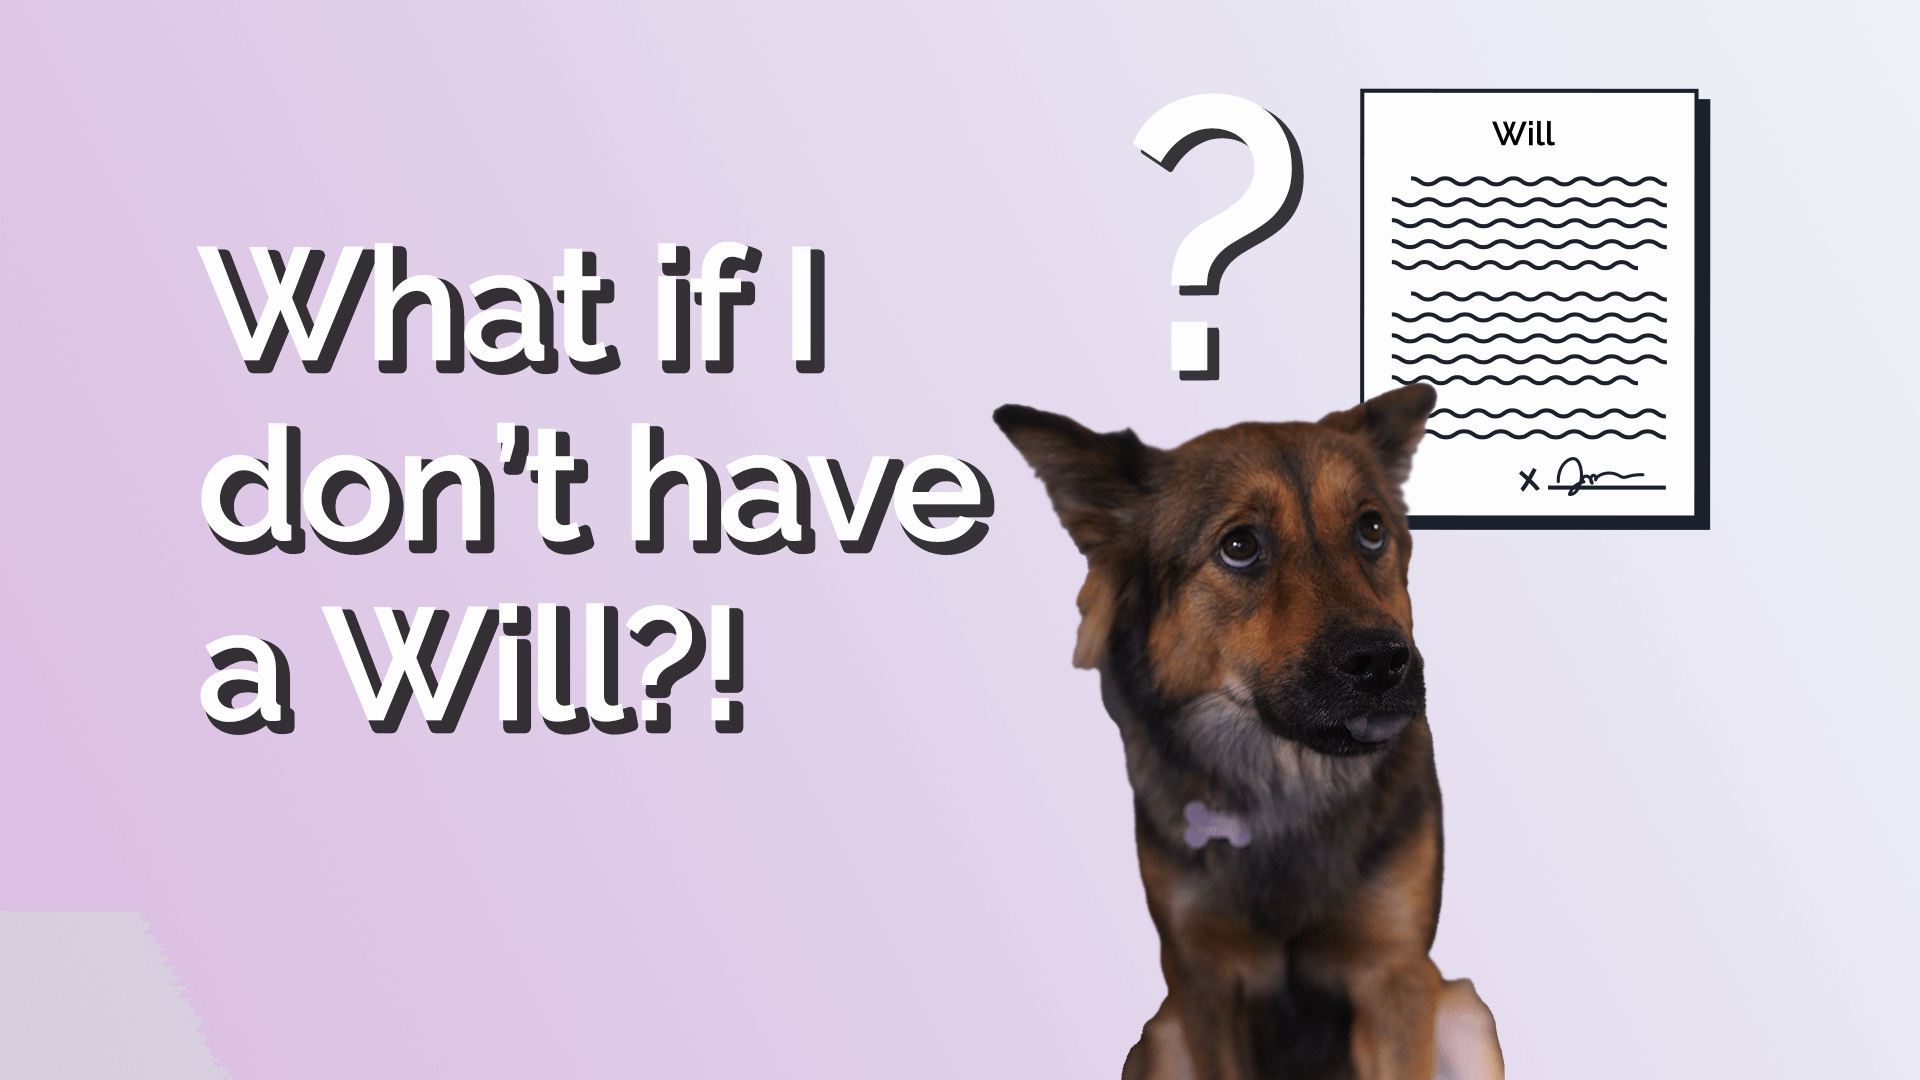 What happens if I do not have a Will?